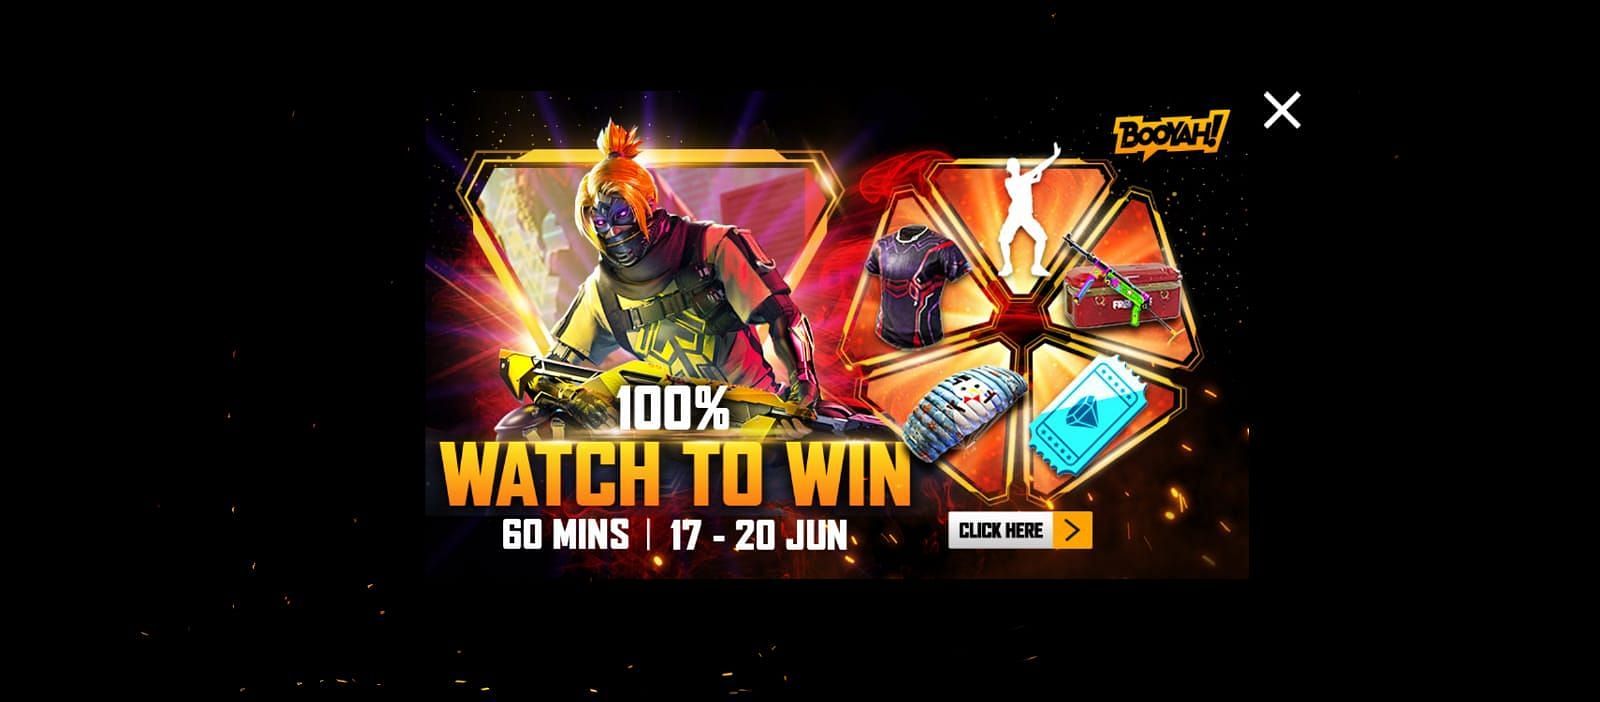 The Watch to Win event lasts till 20 June (Image via Garena)